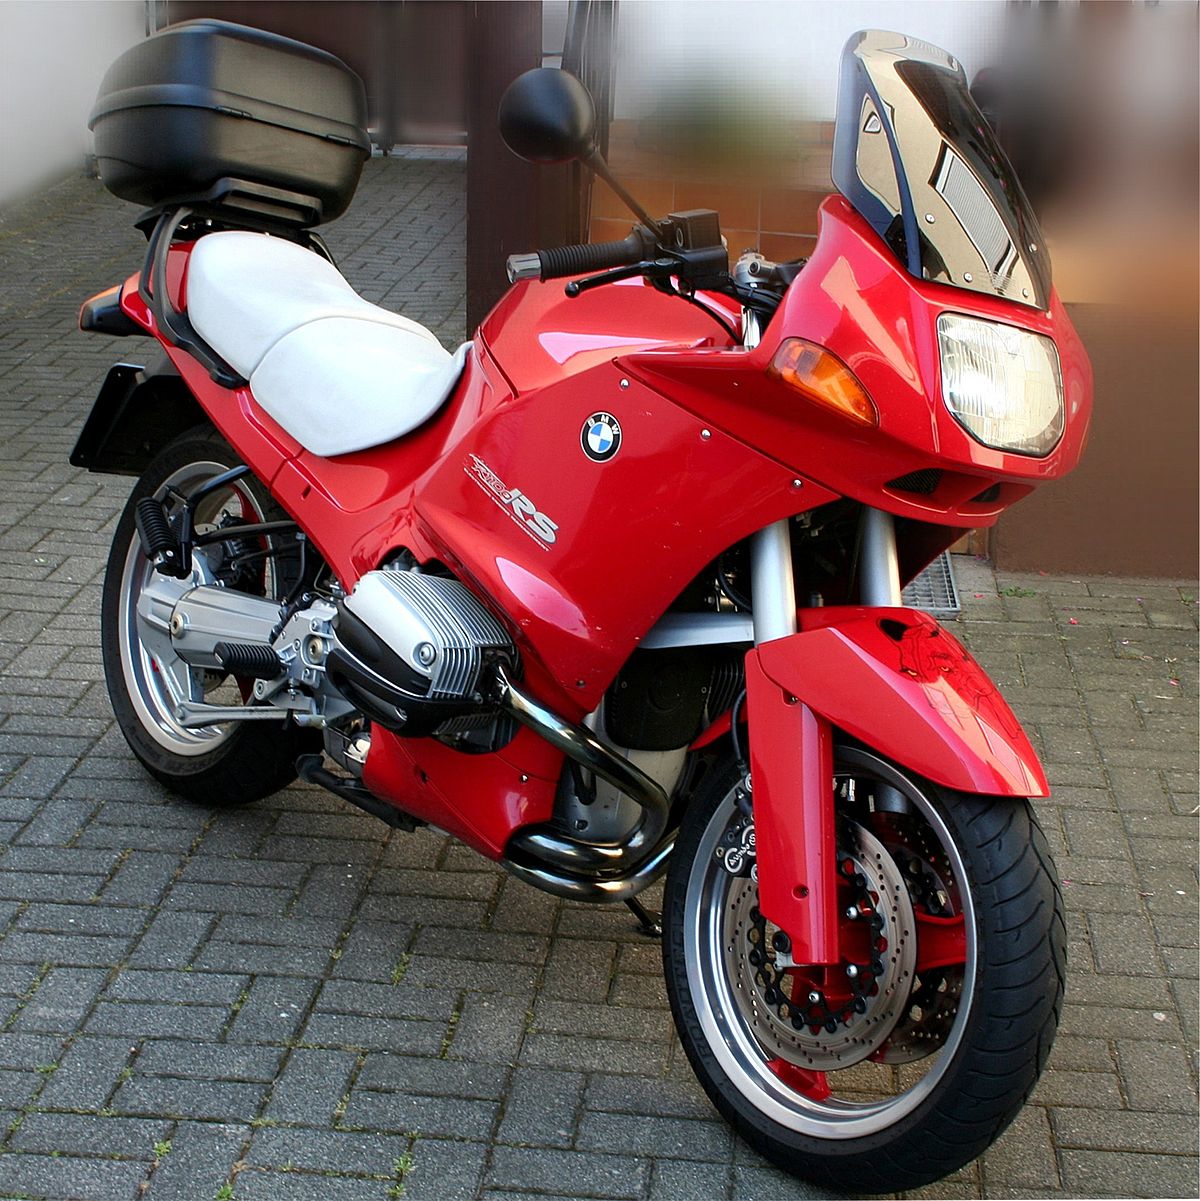 Bmw K 1100 Rs - reviews, prices, ratings with various photos